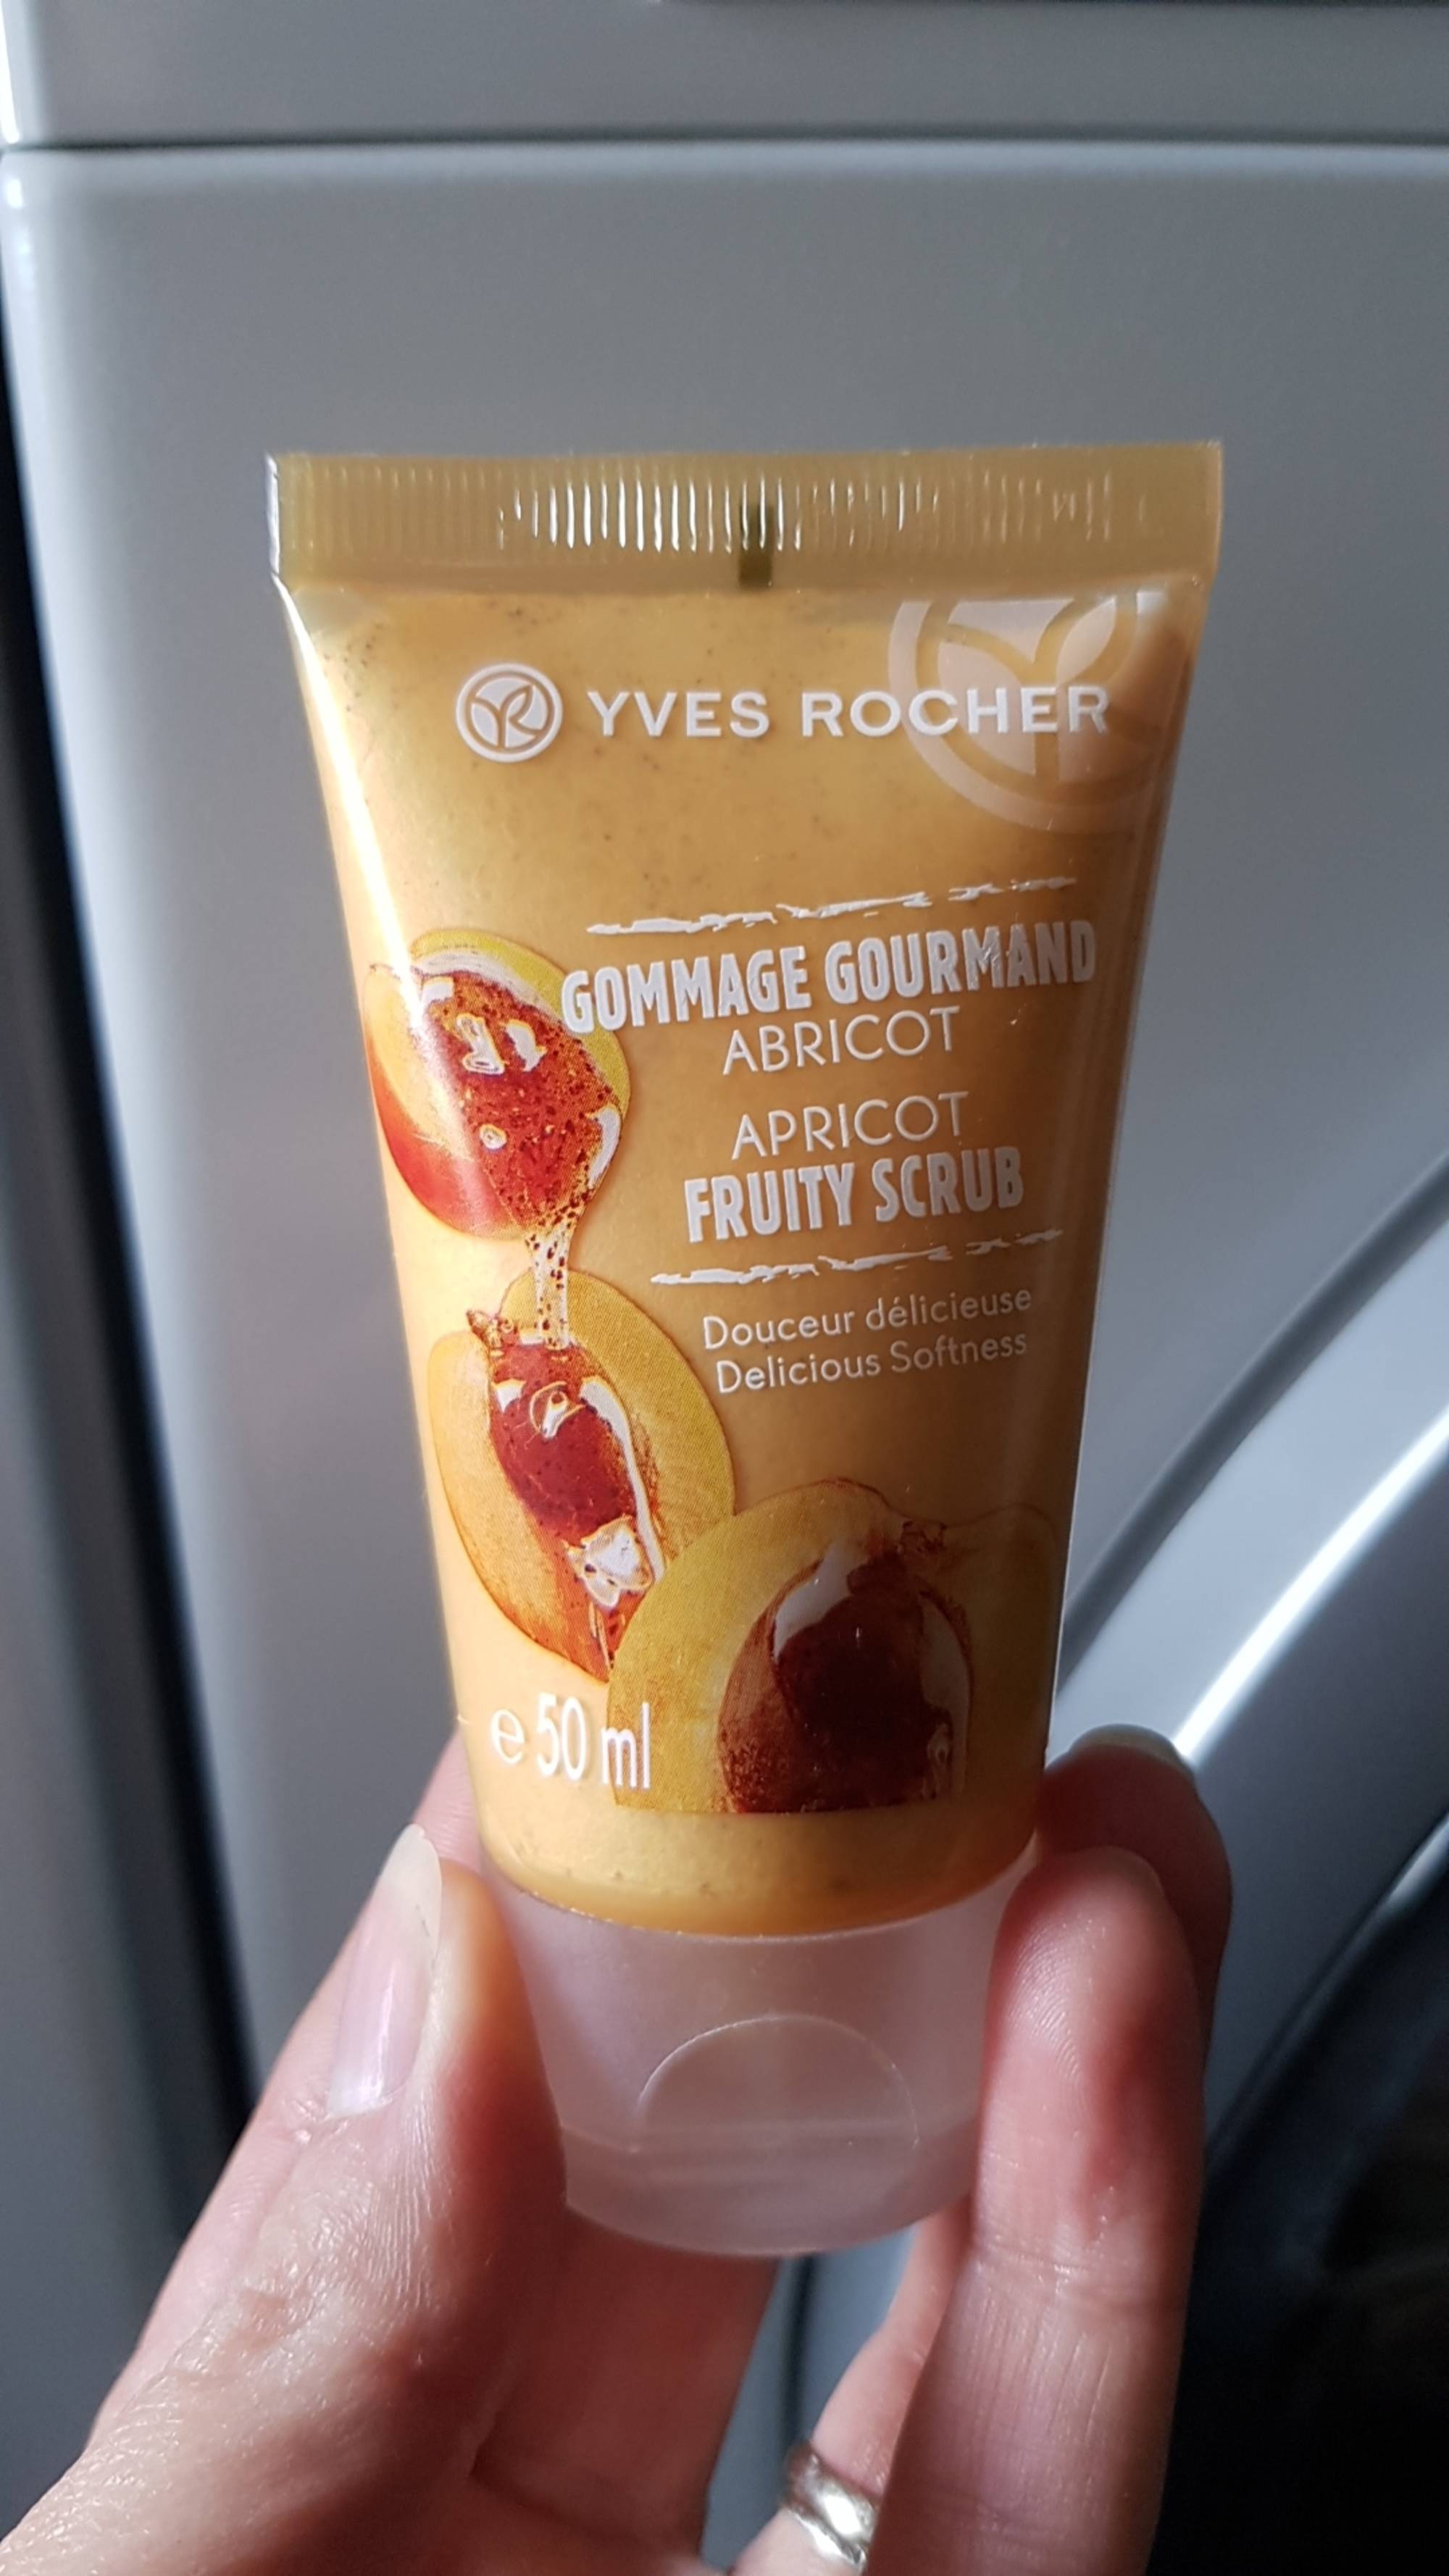 YVES ROCHER - Abricot - Gommage gourmand